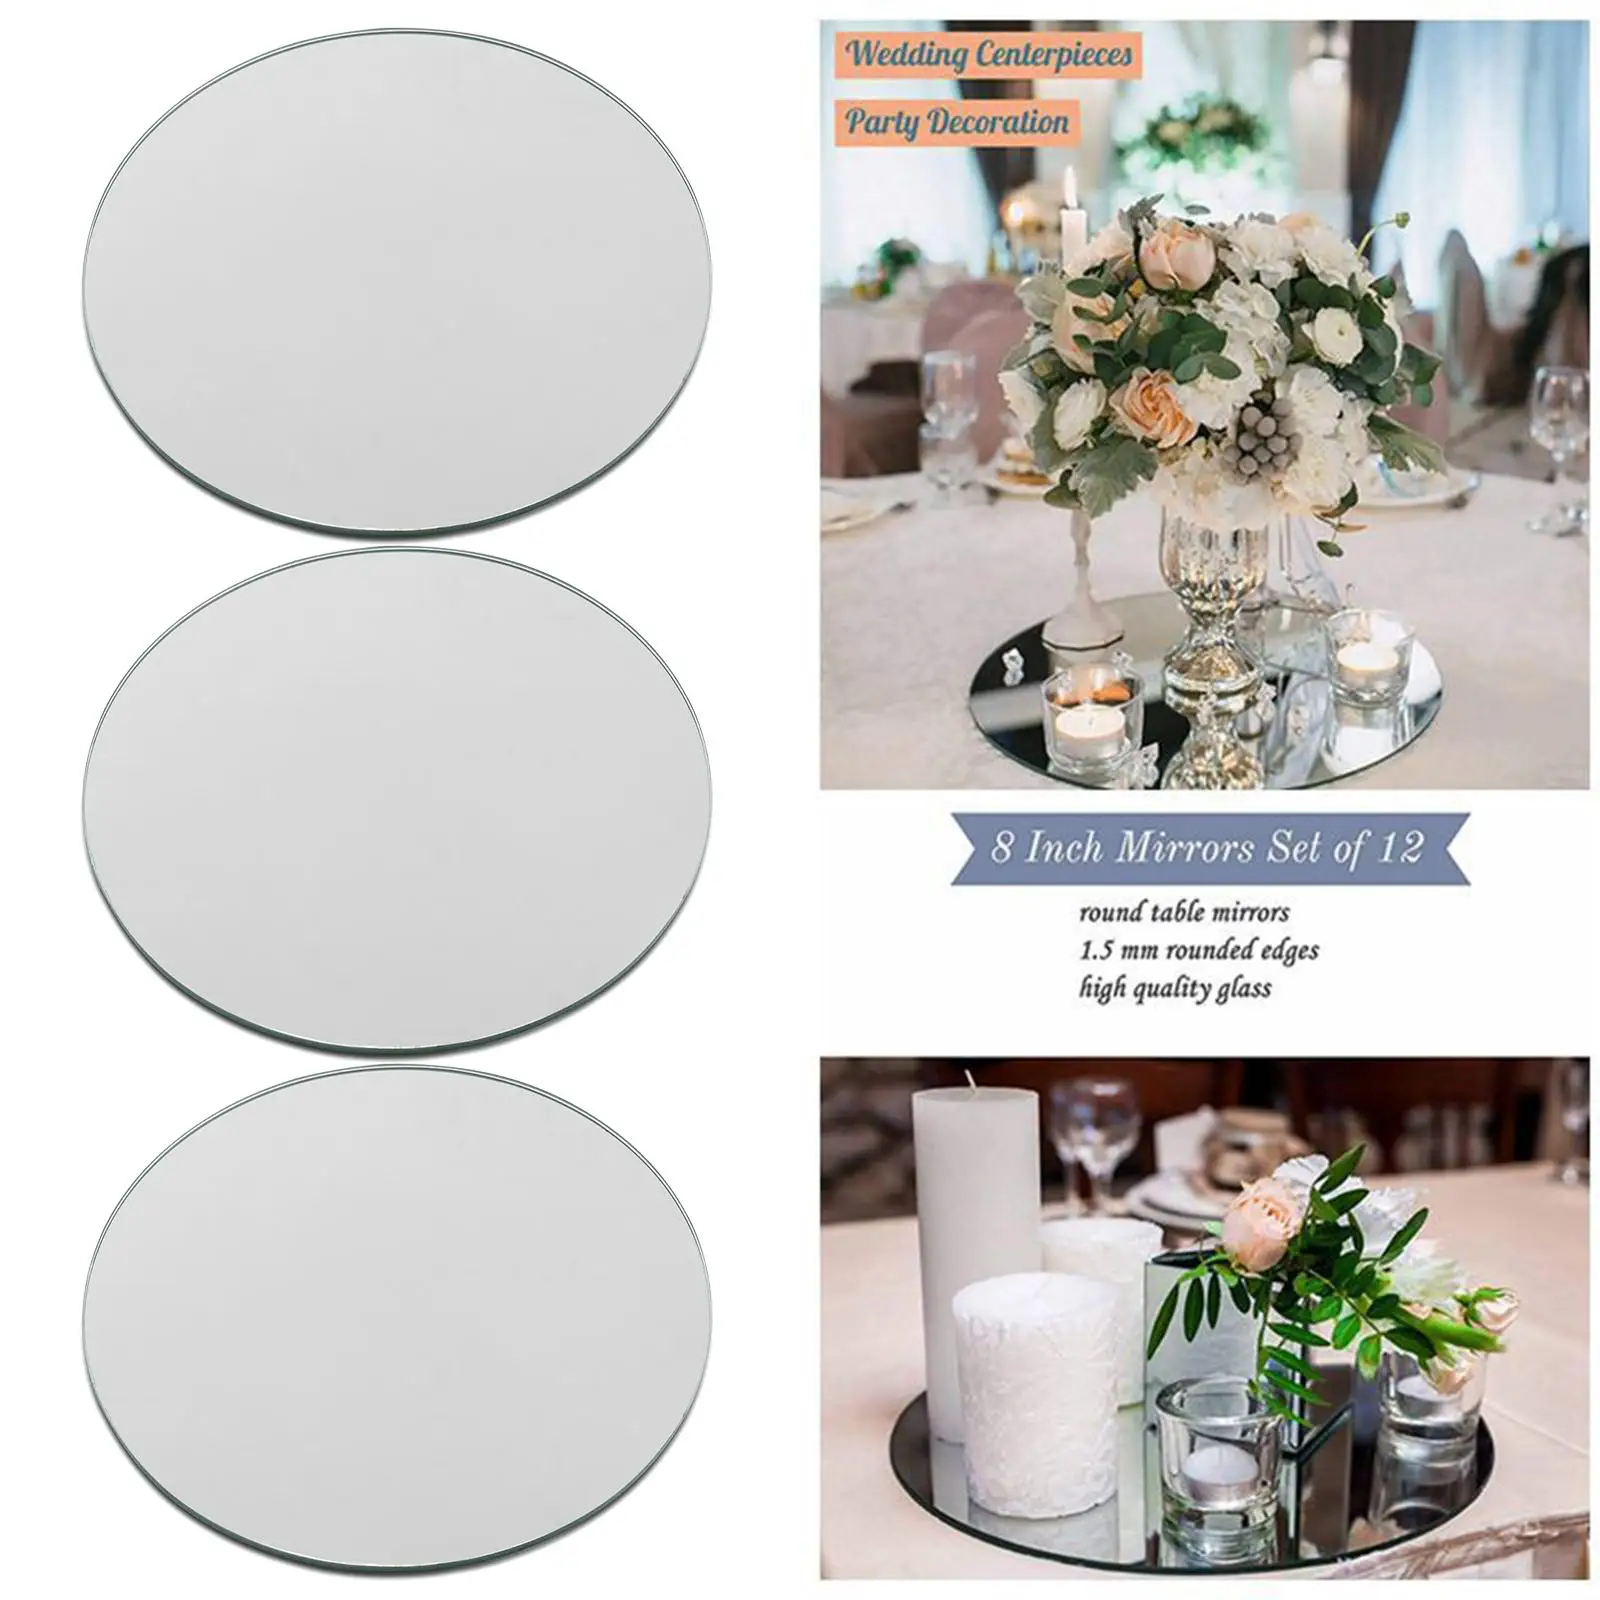 Set of 3 Round Mirror Shaped Candle Holder Organizers for Centerpieces